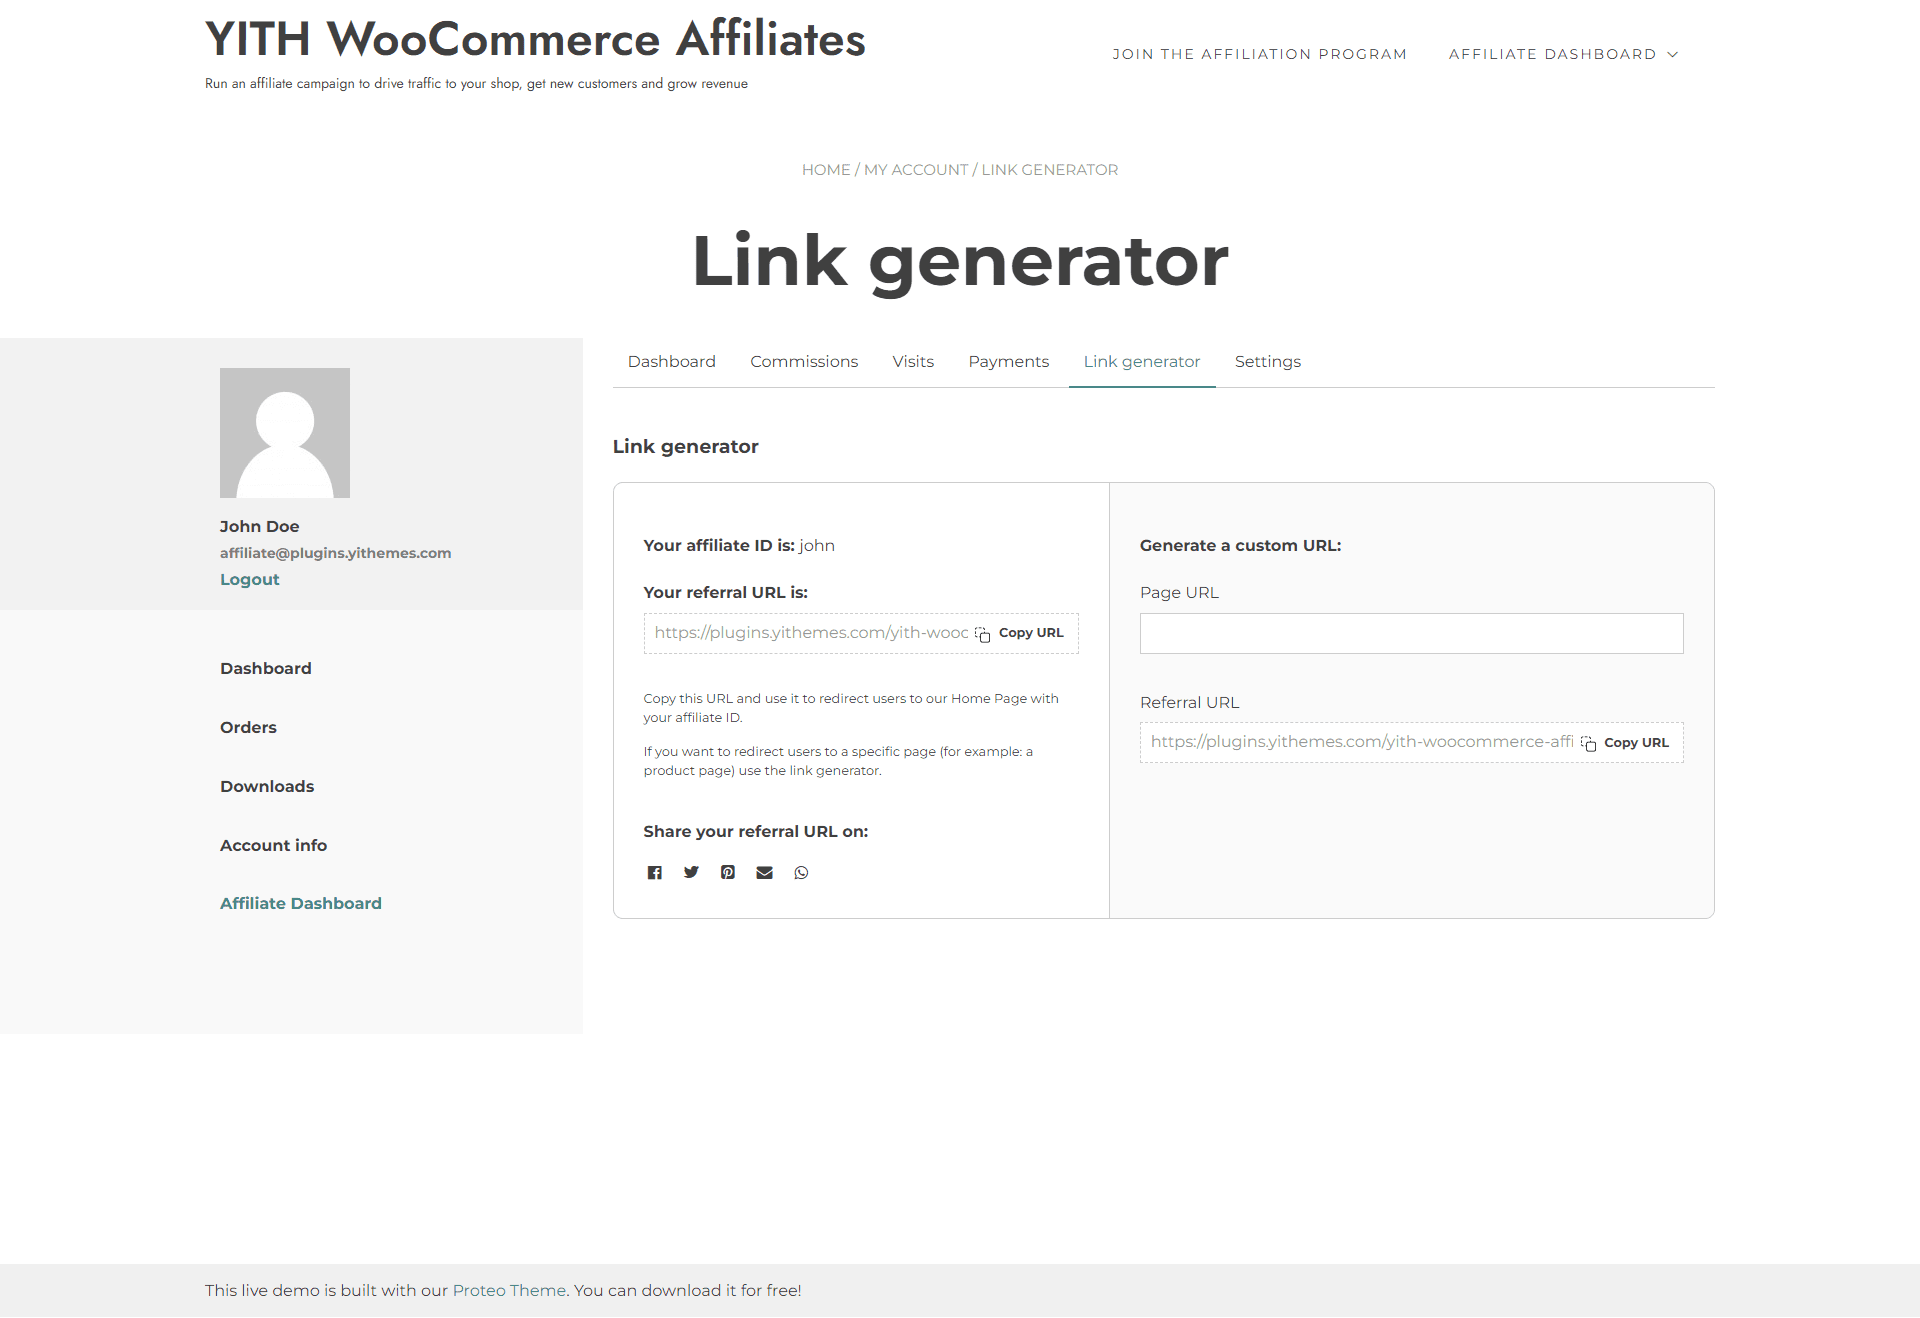 YITH affiliate link generator